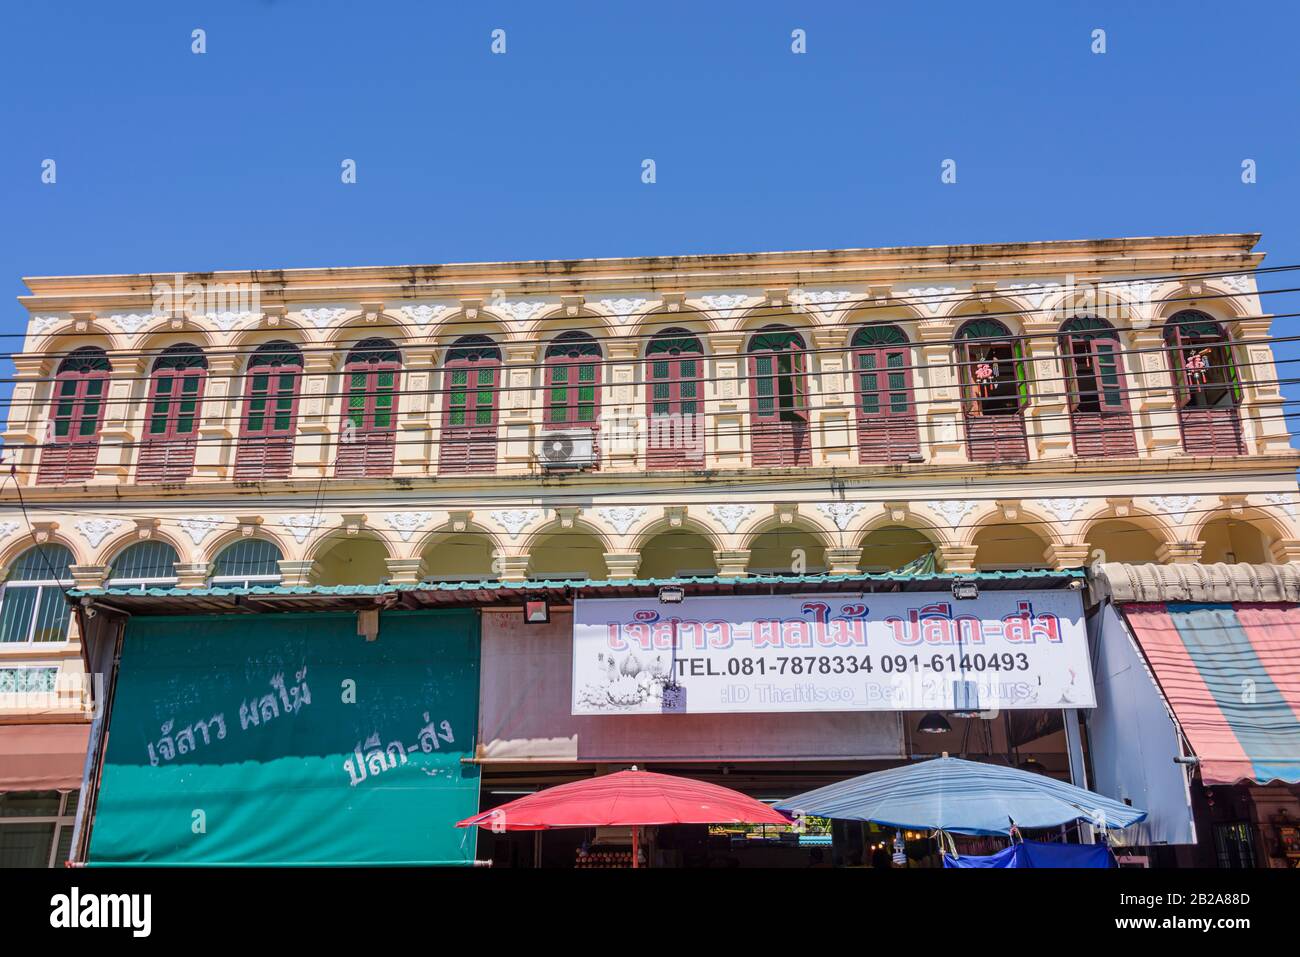 Electrical cables stretched in front of a Sino-Portuguese building with many windows, Thailand Stock Photo